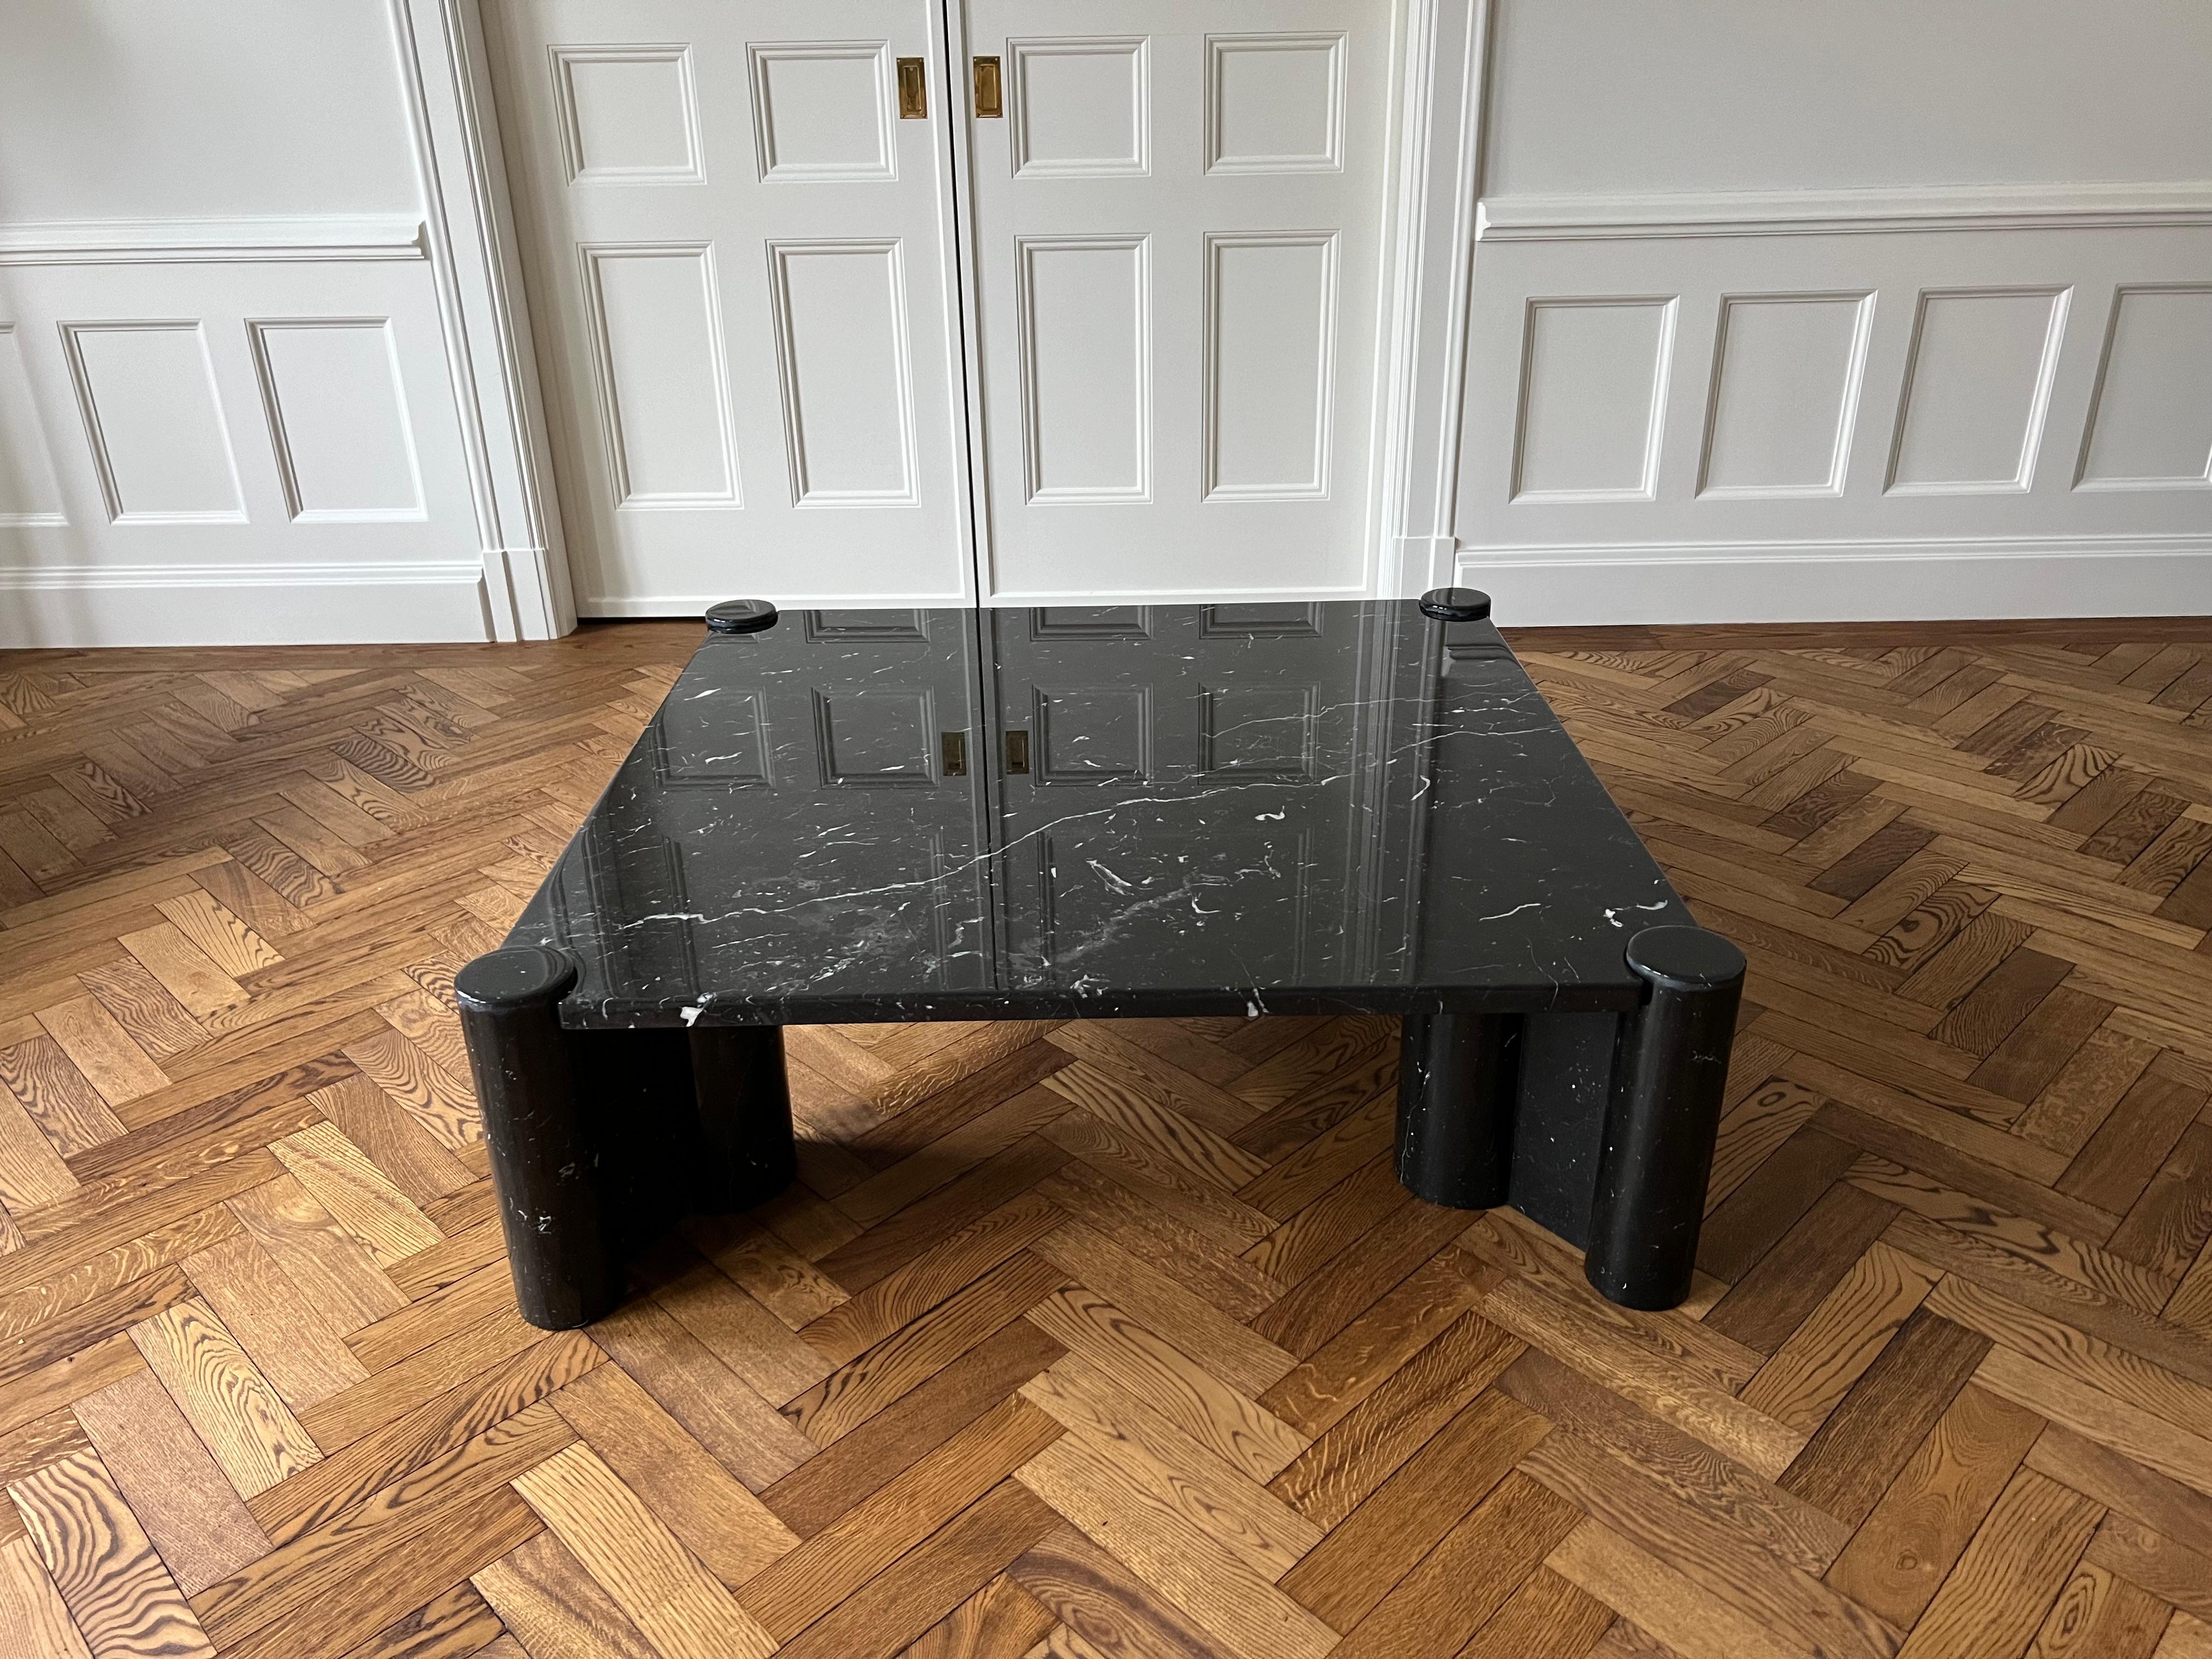 Stunning ‘Jumbo’ coffee table designed by Gae Aulenti and manufactured by Knoll International, Italy 1965. This example was made in black marquina marble with white veins. This table would look amazing in any modern home or interior. 

The table is